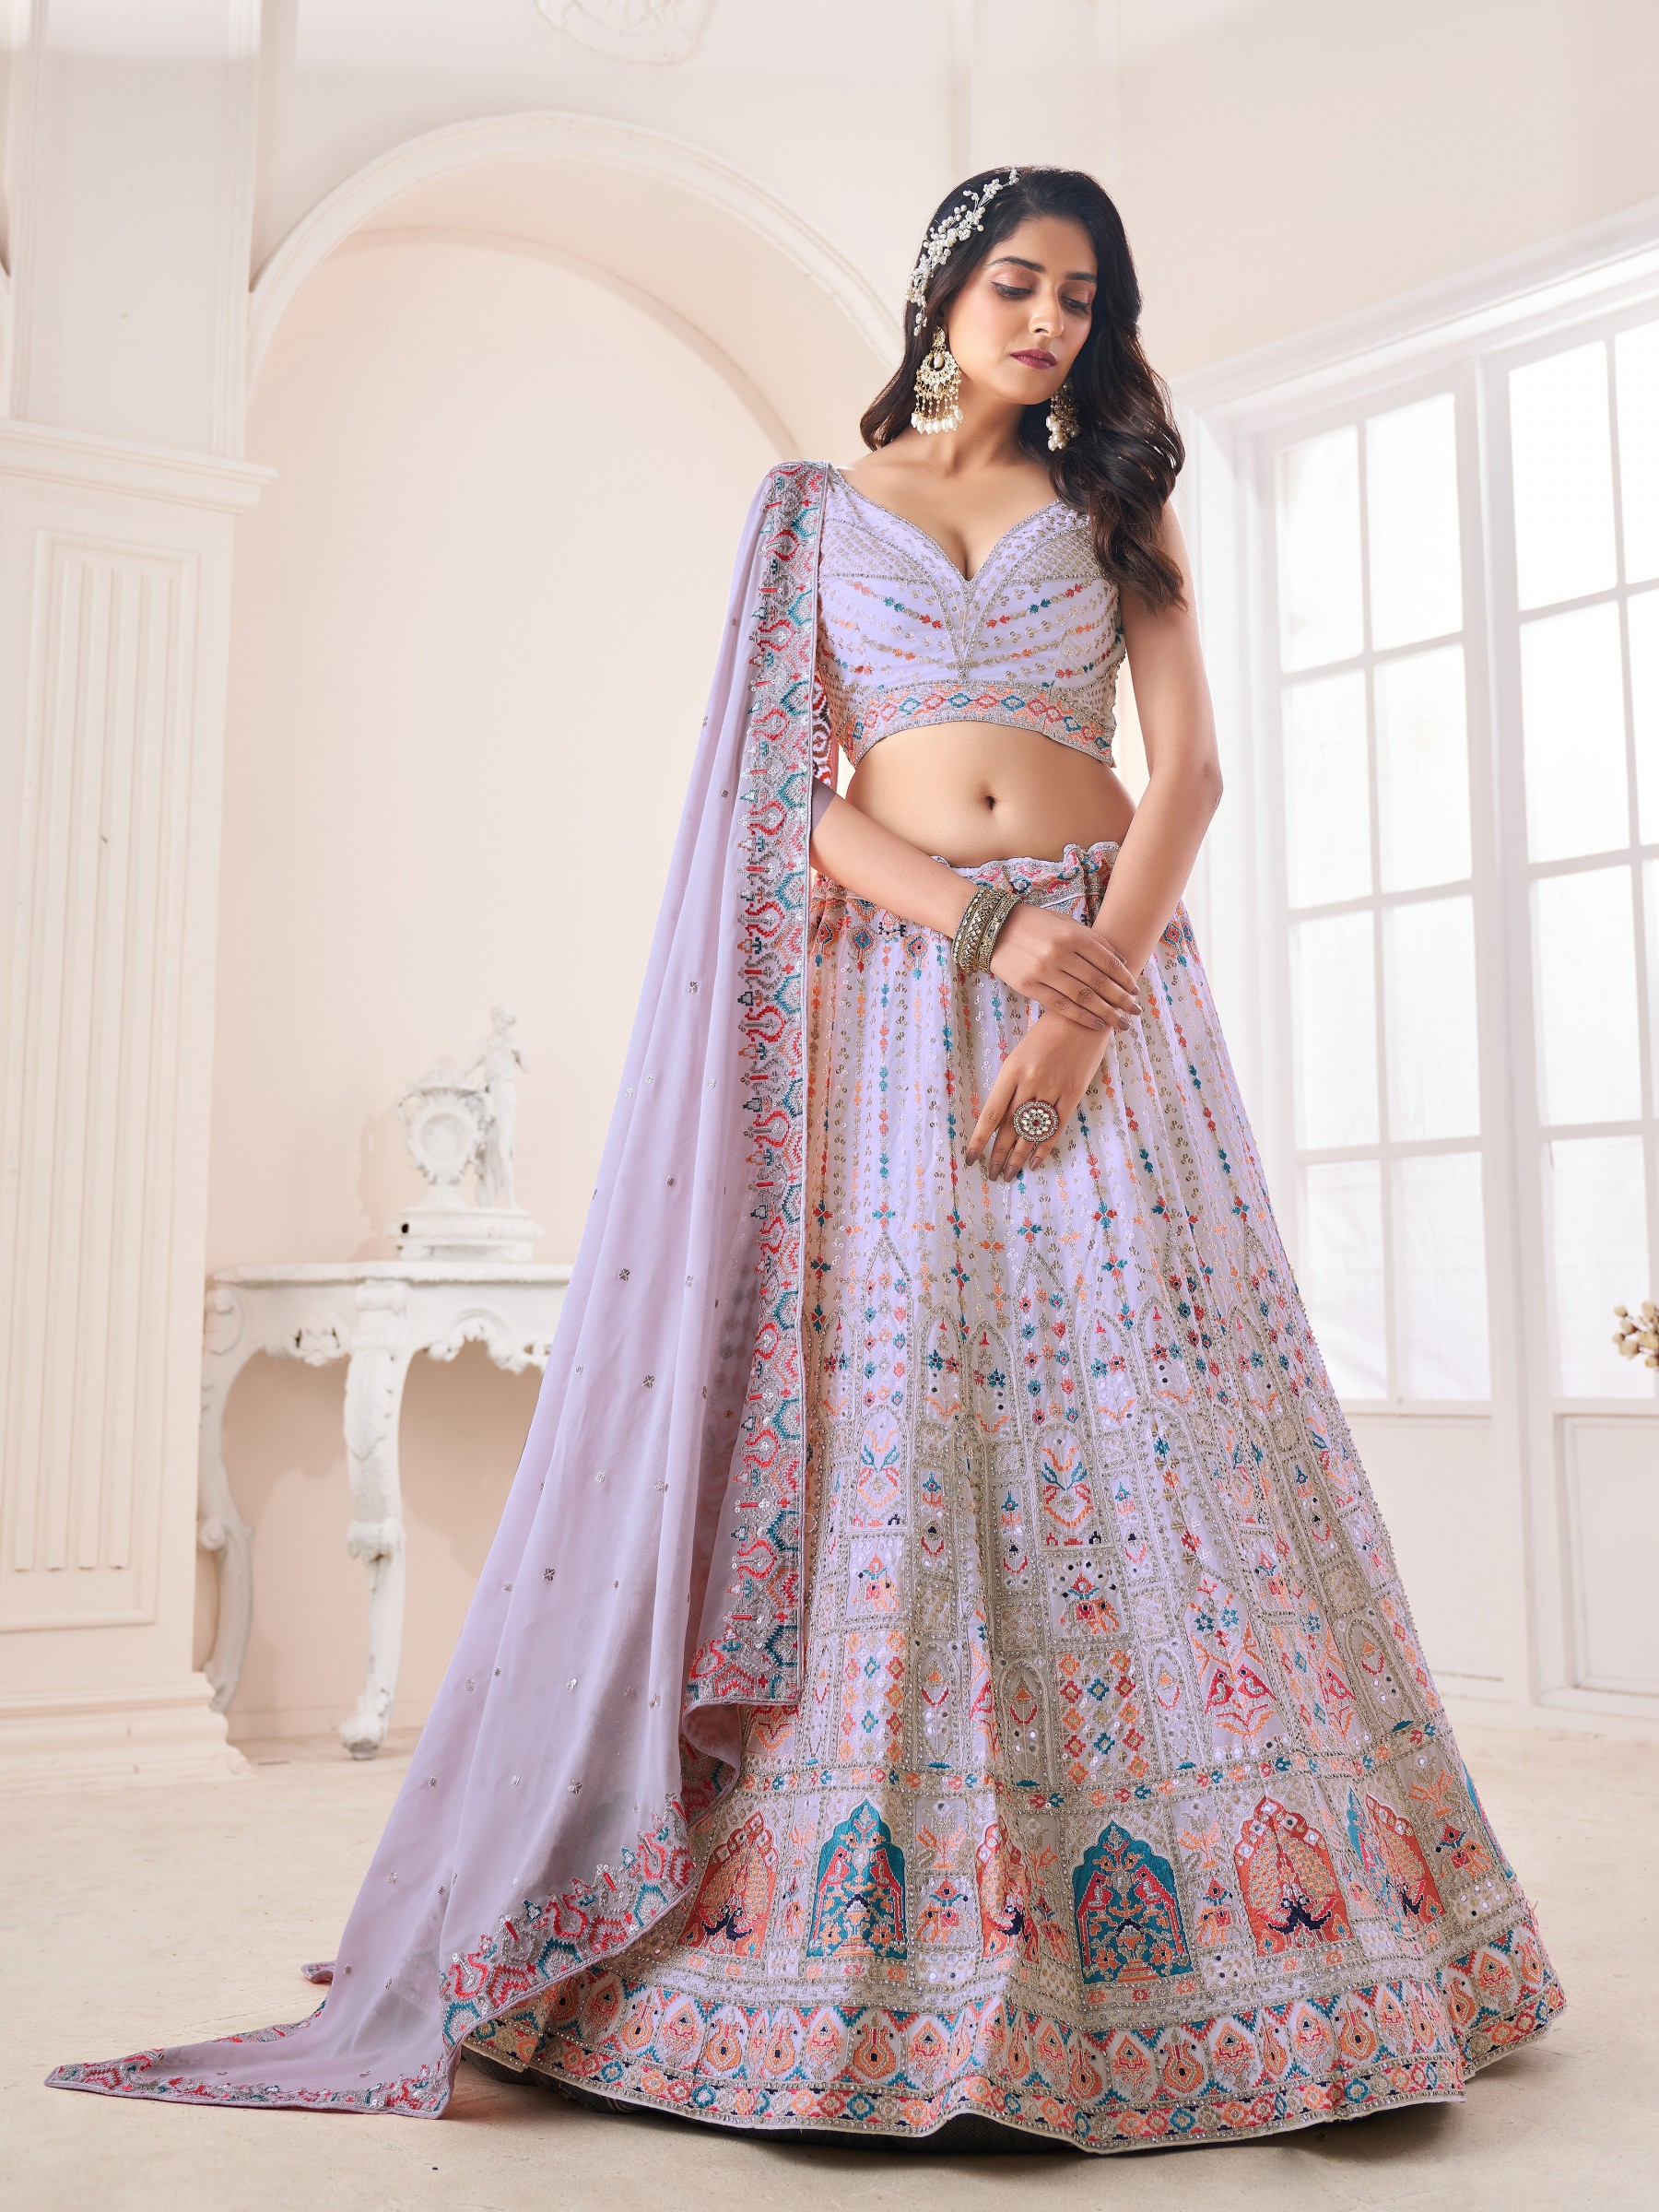 Geogratte Fabrics Party Wear Lehenga in Lavender Color With Embroidery Work